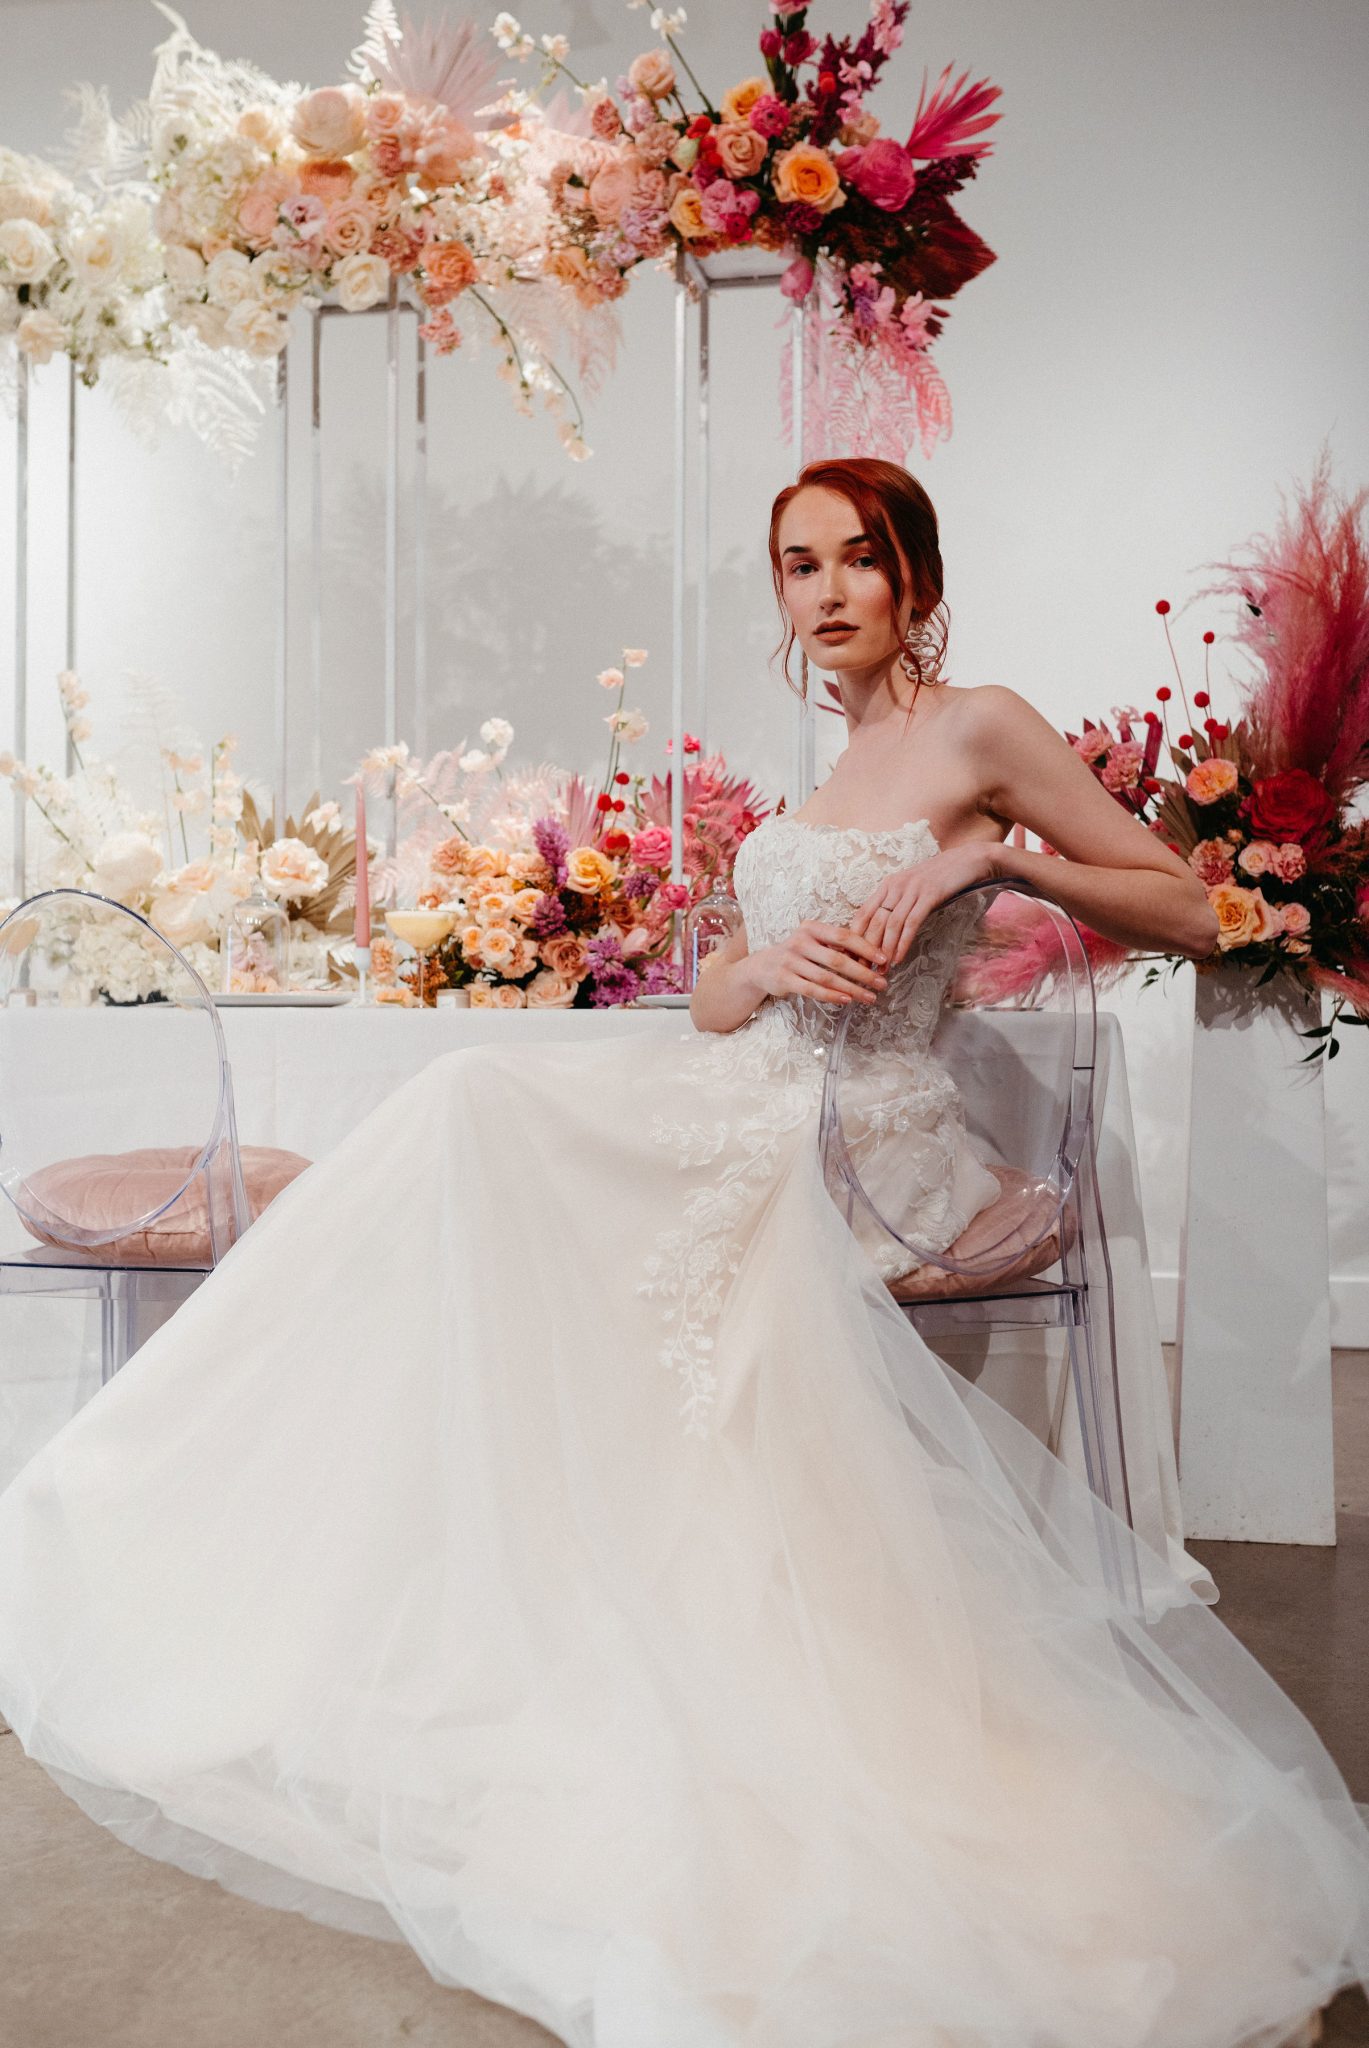 Bride poses in front of an ombre floral installation as wedding decor inspiration